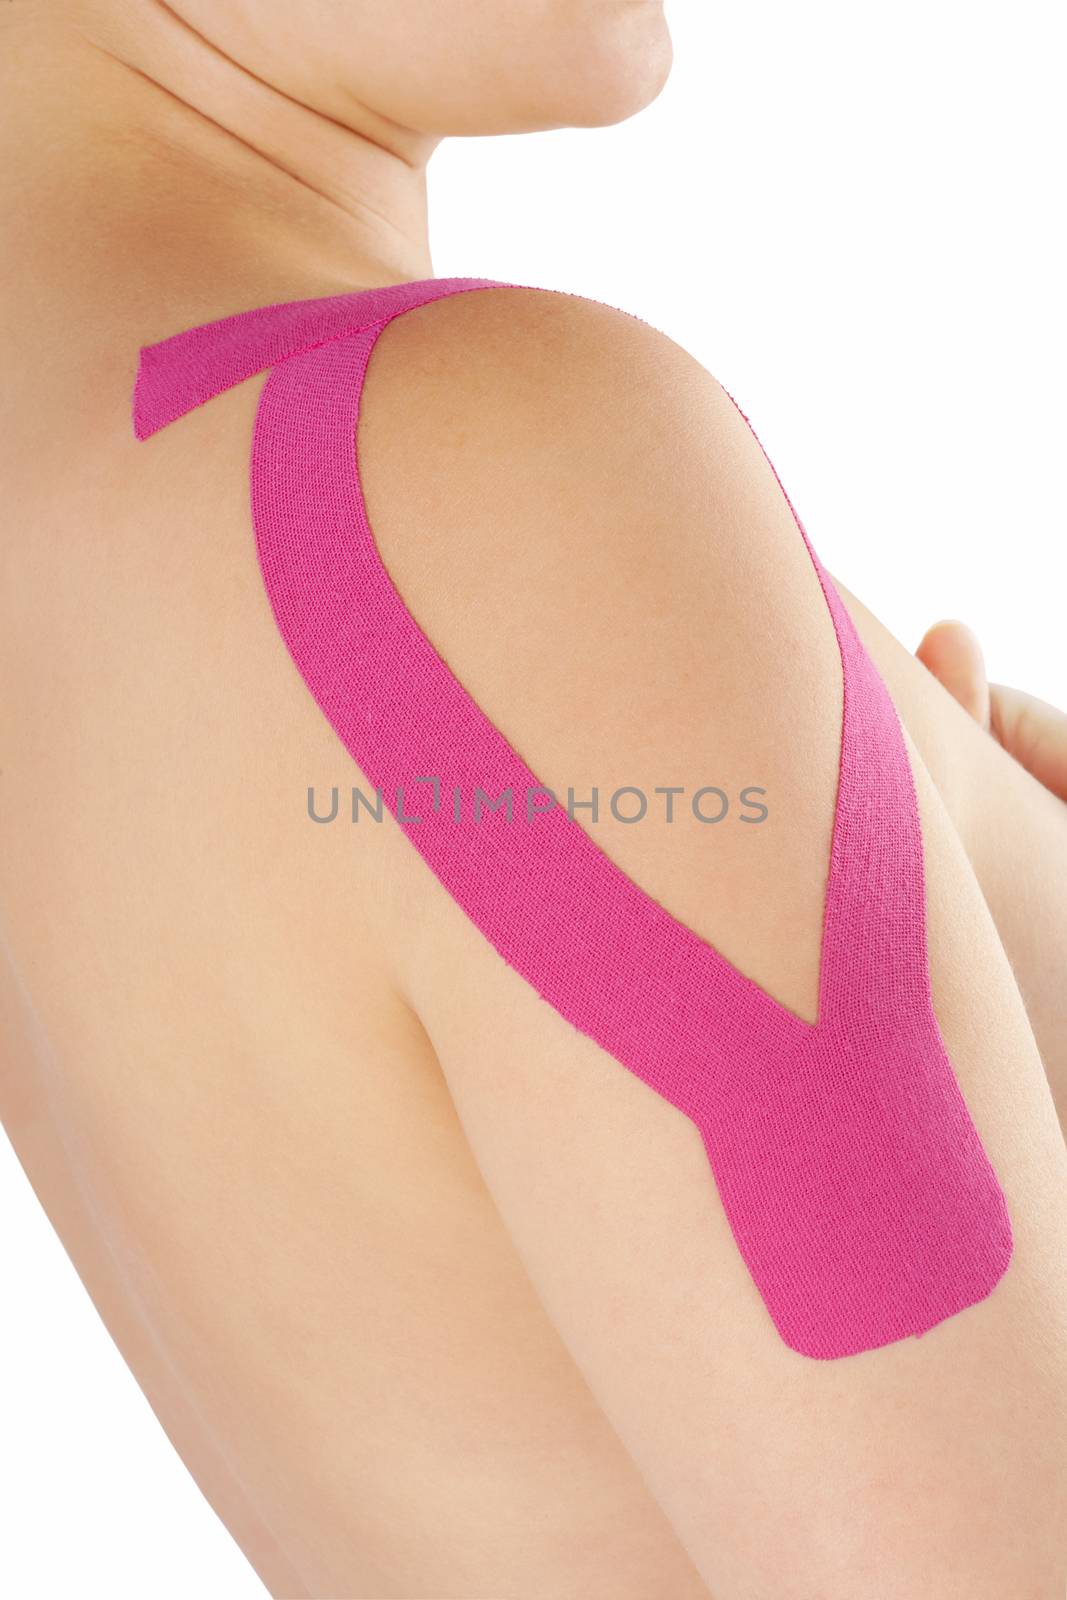 Therapeutic tape on female shoulder. by eskymaks